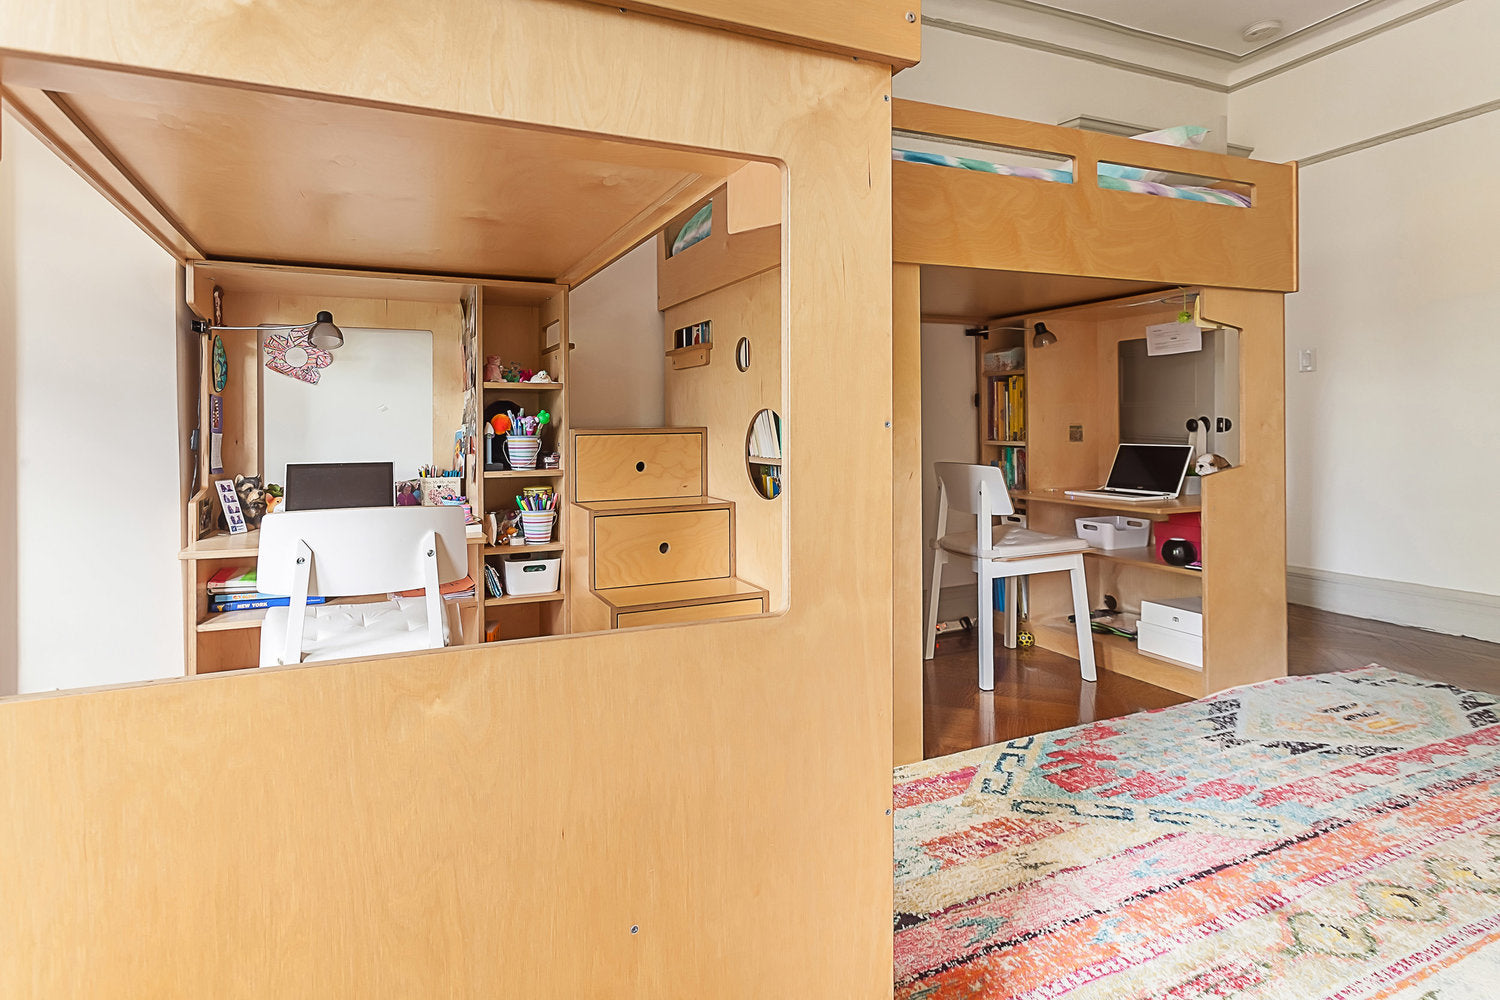 Compact loft bed with desk, storage, rug in room.